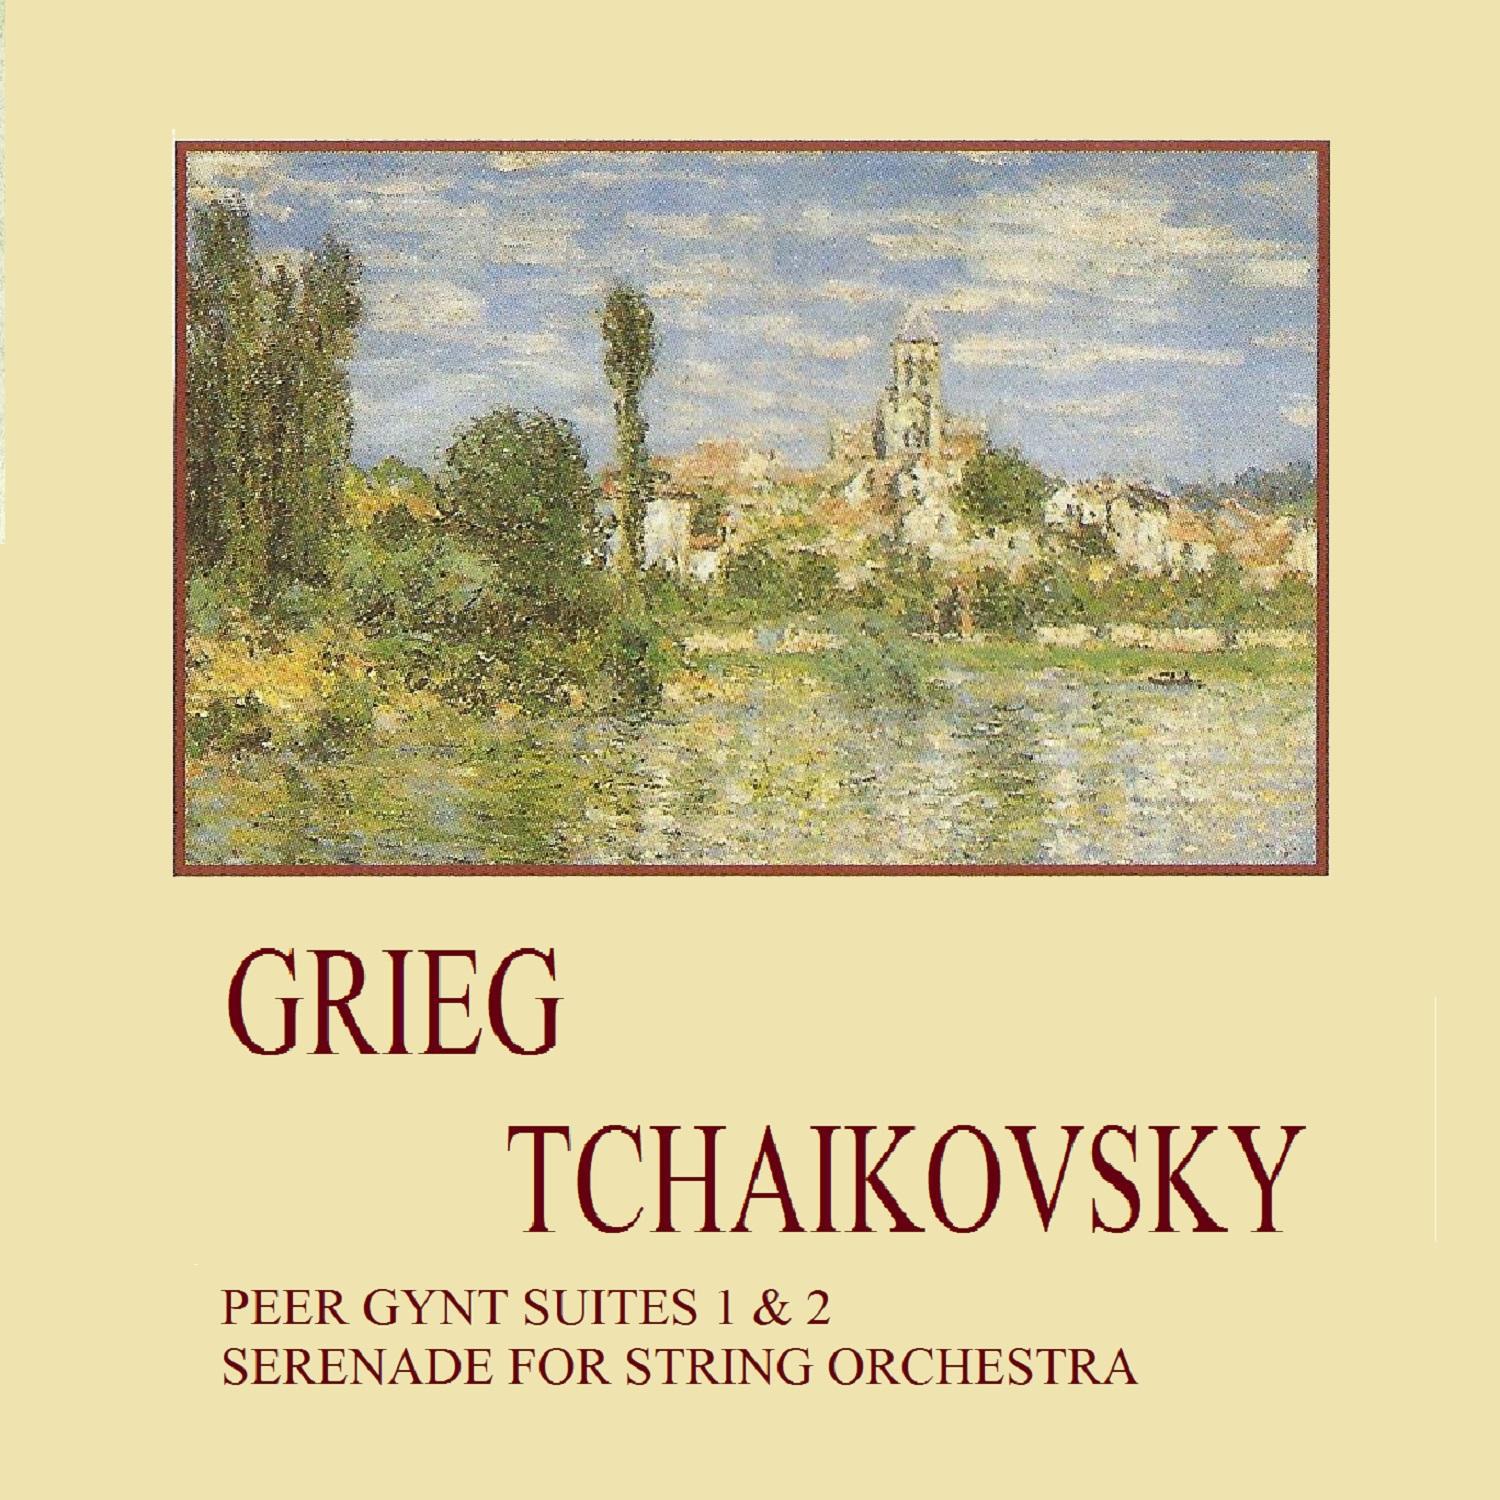 Grieg, Tchaikovsky, Peer Gynt Suites 1 & 2, Serenade for String Orchestra